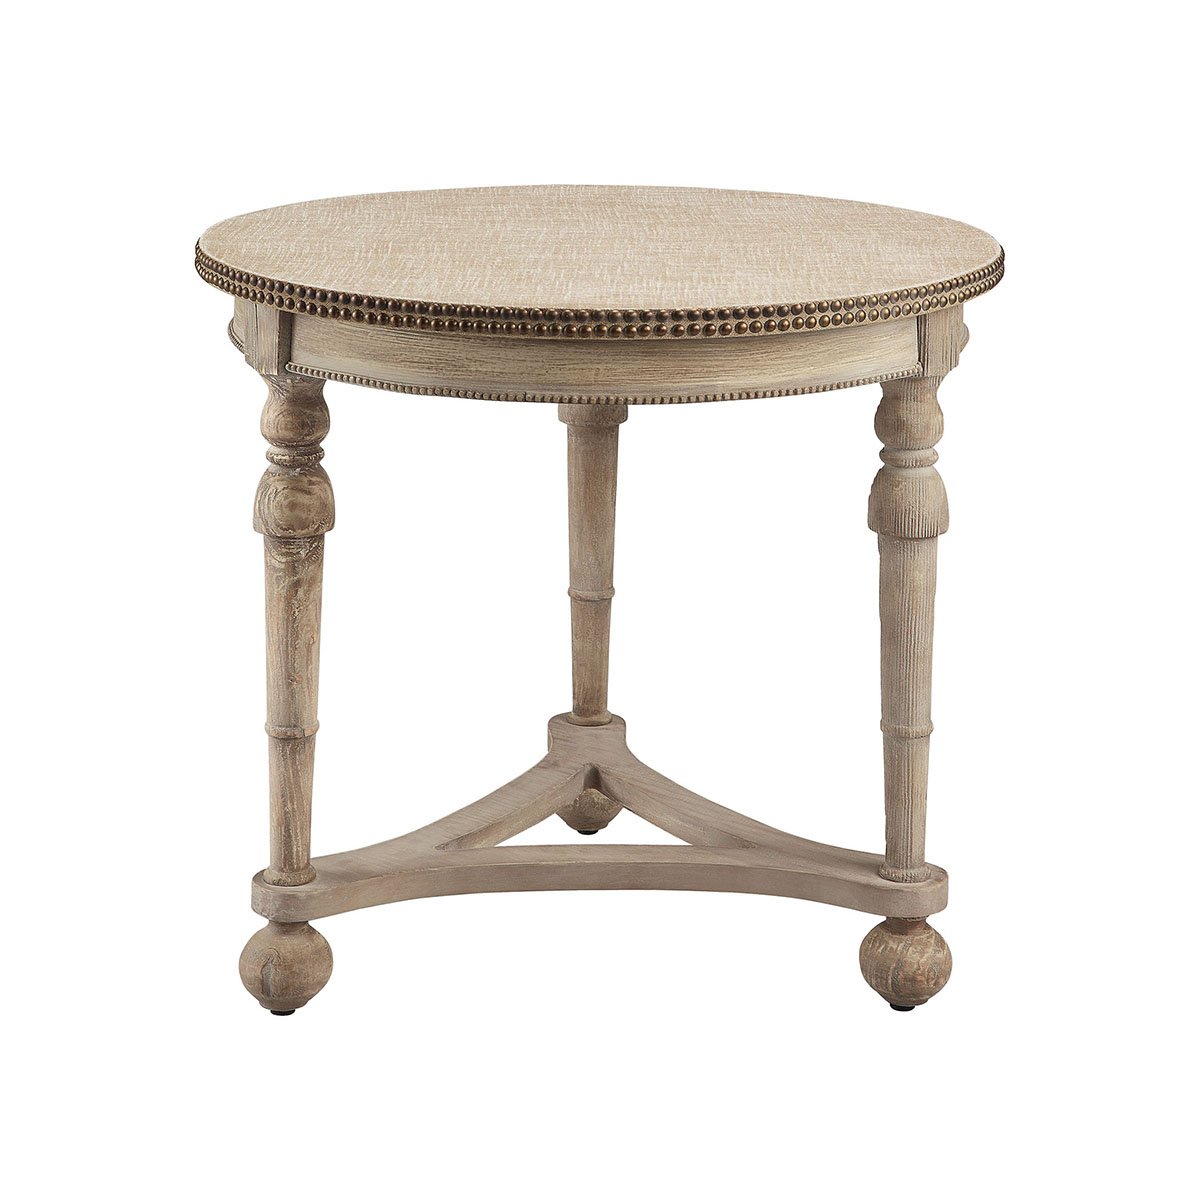 stein world wyeth accent table antique cream and double brass finish safavieh storage bench side design for bedroom small clear coffee industrial style dining room tables edmonton